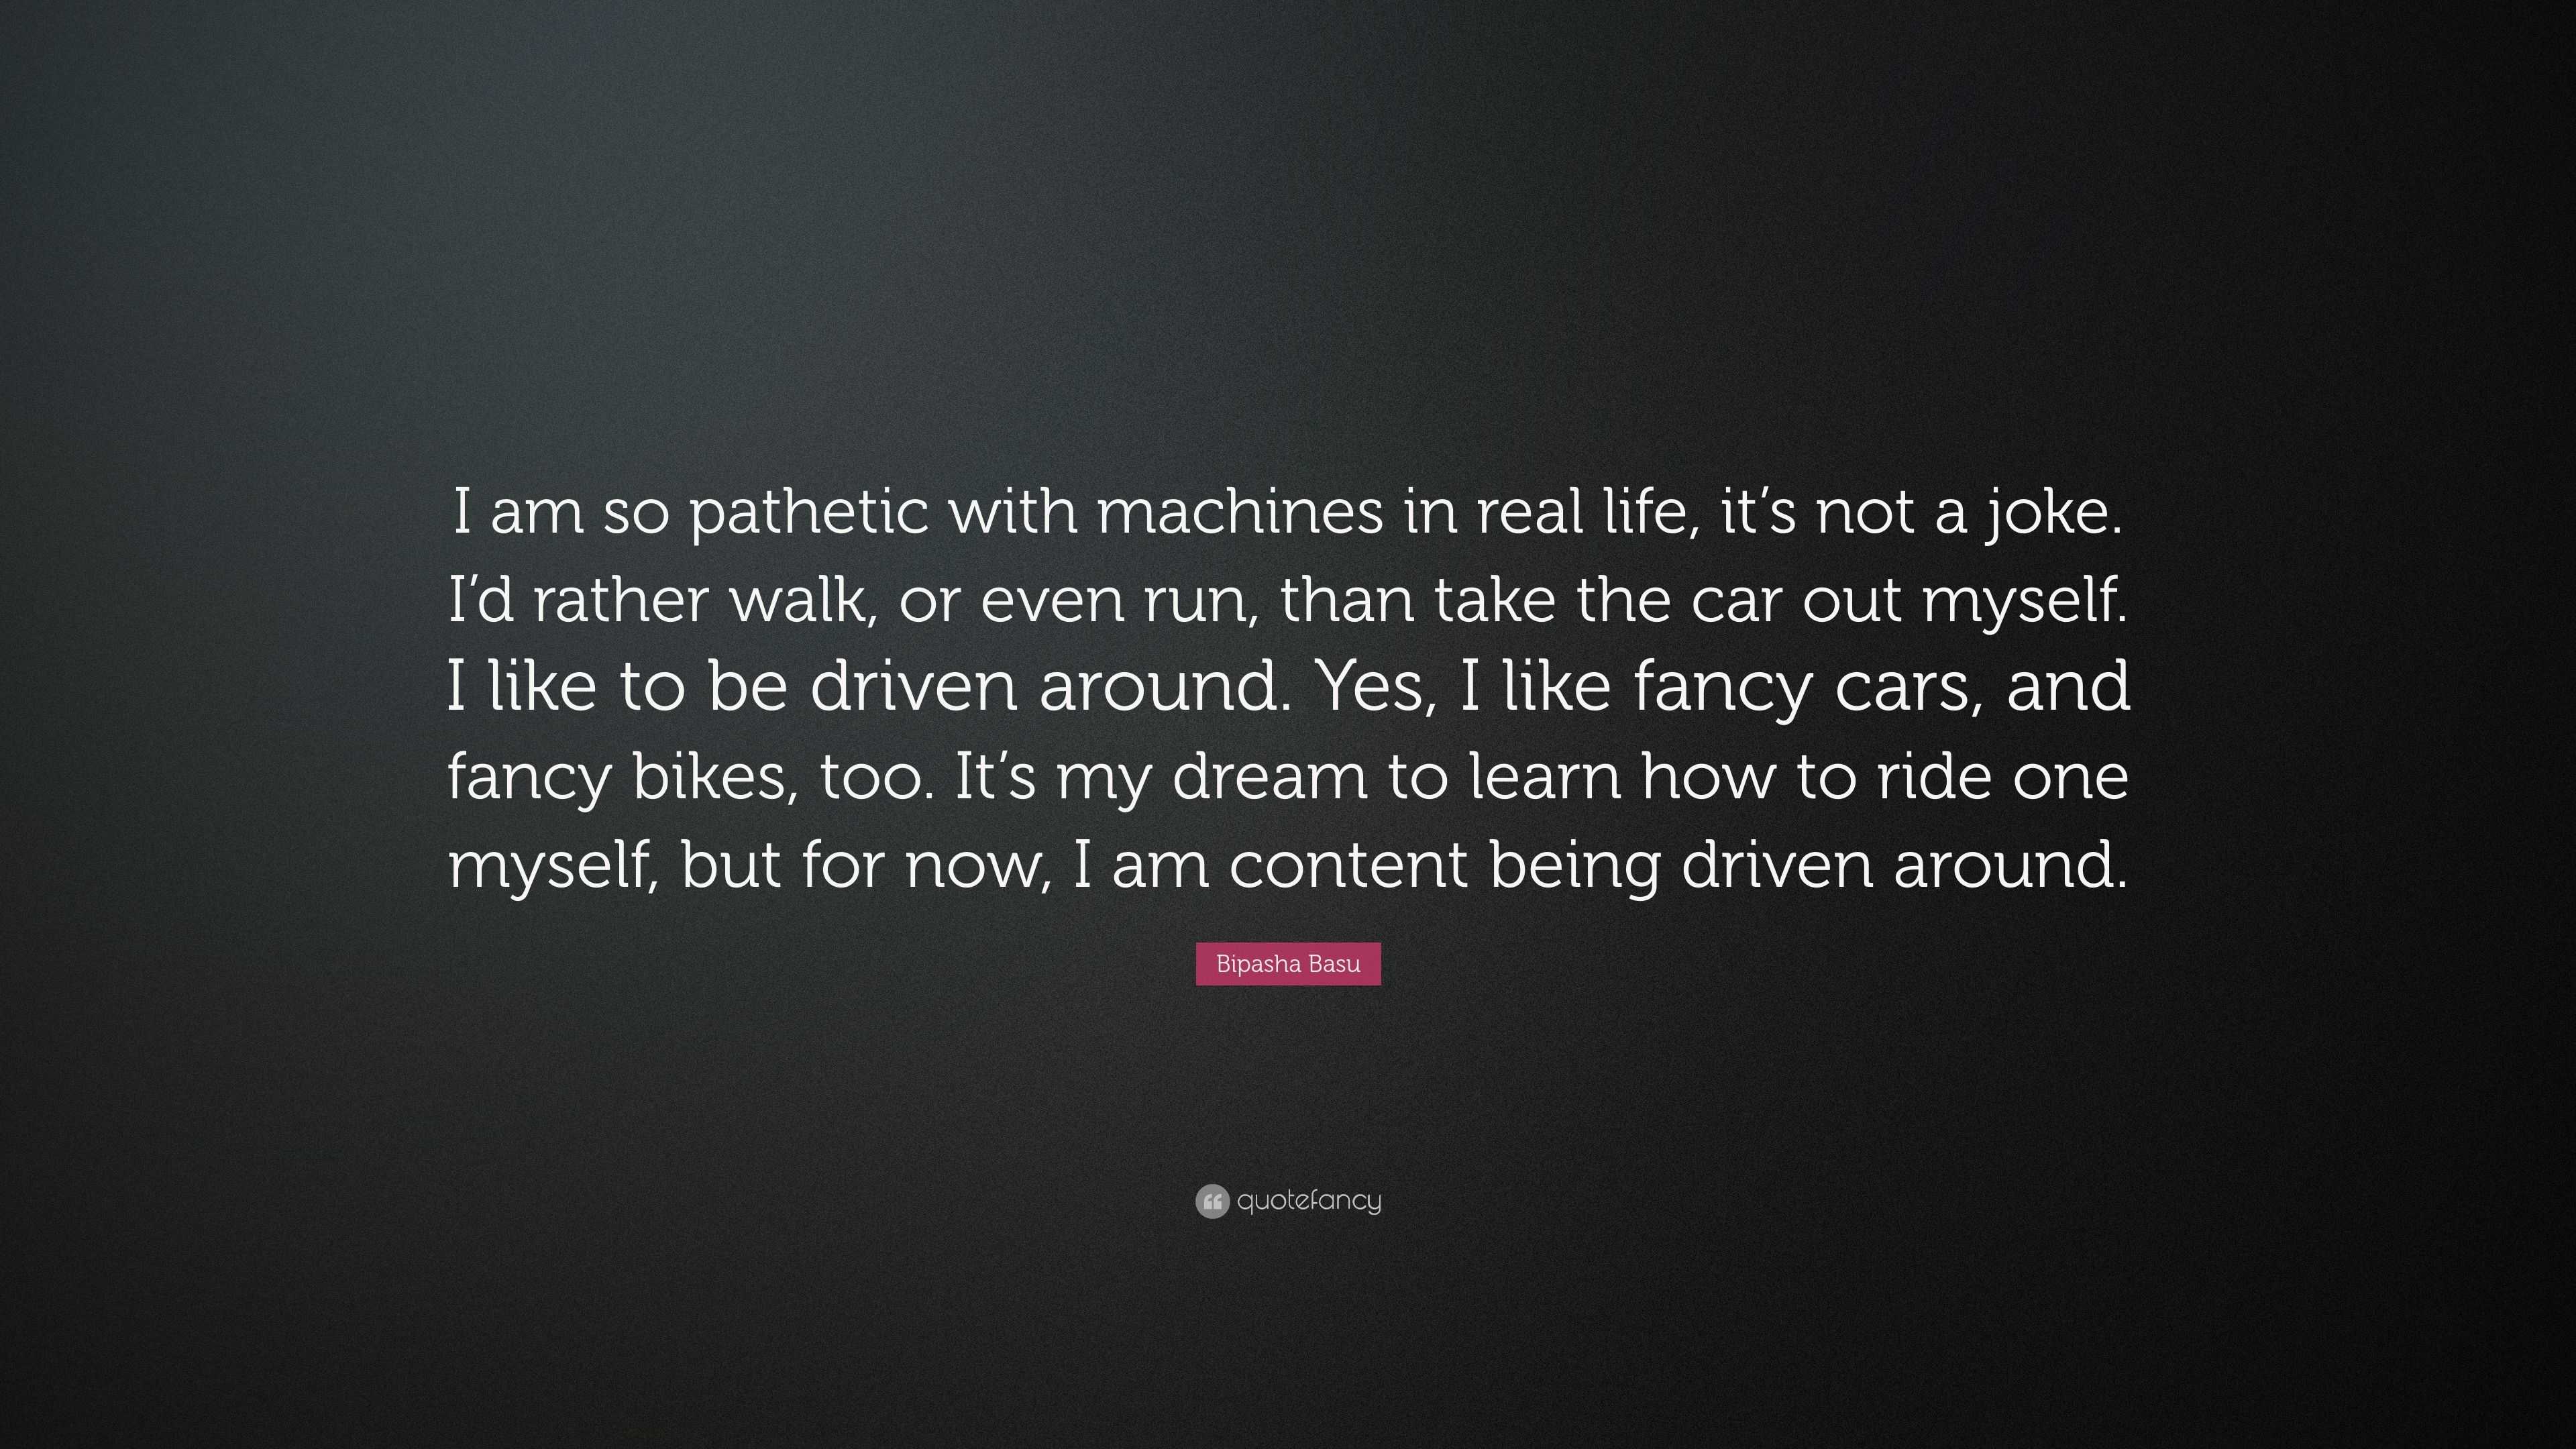 Bipasha Basu Quote “I am so pathetic with machines in real life it s